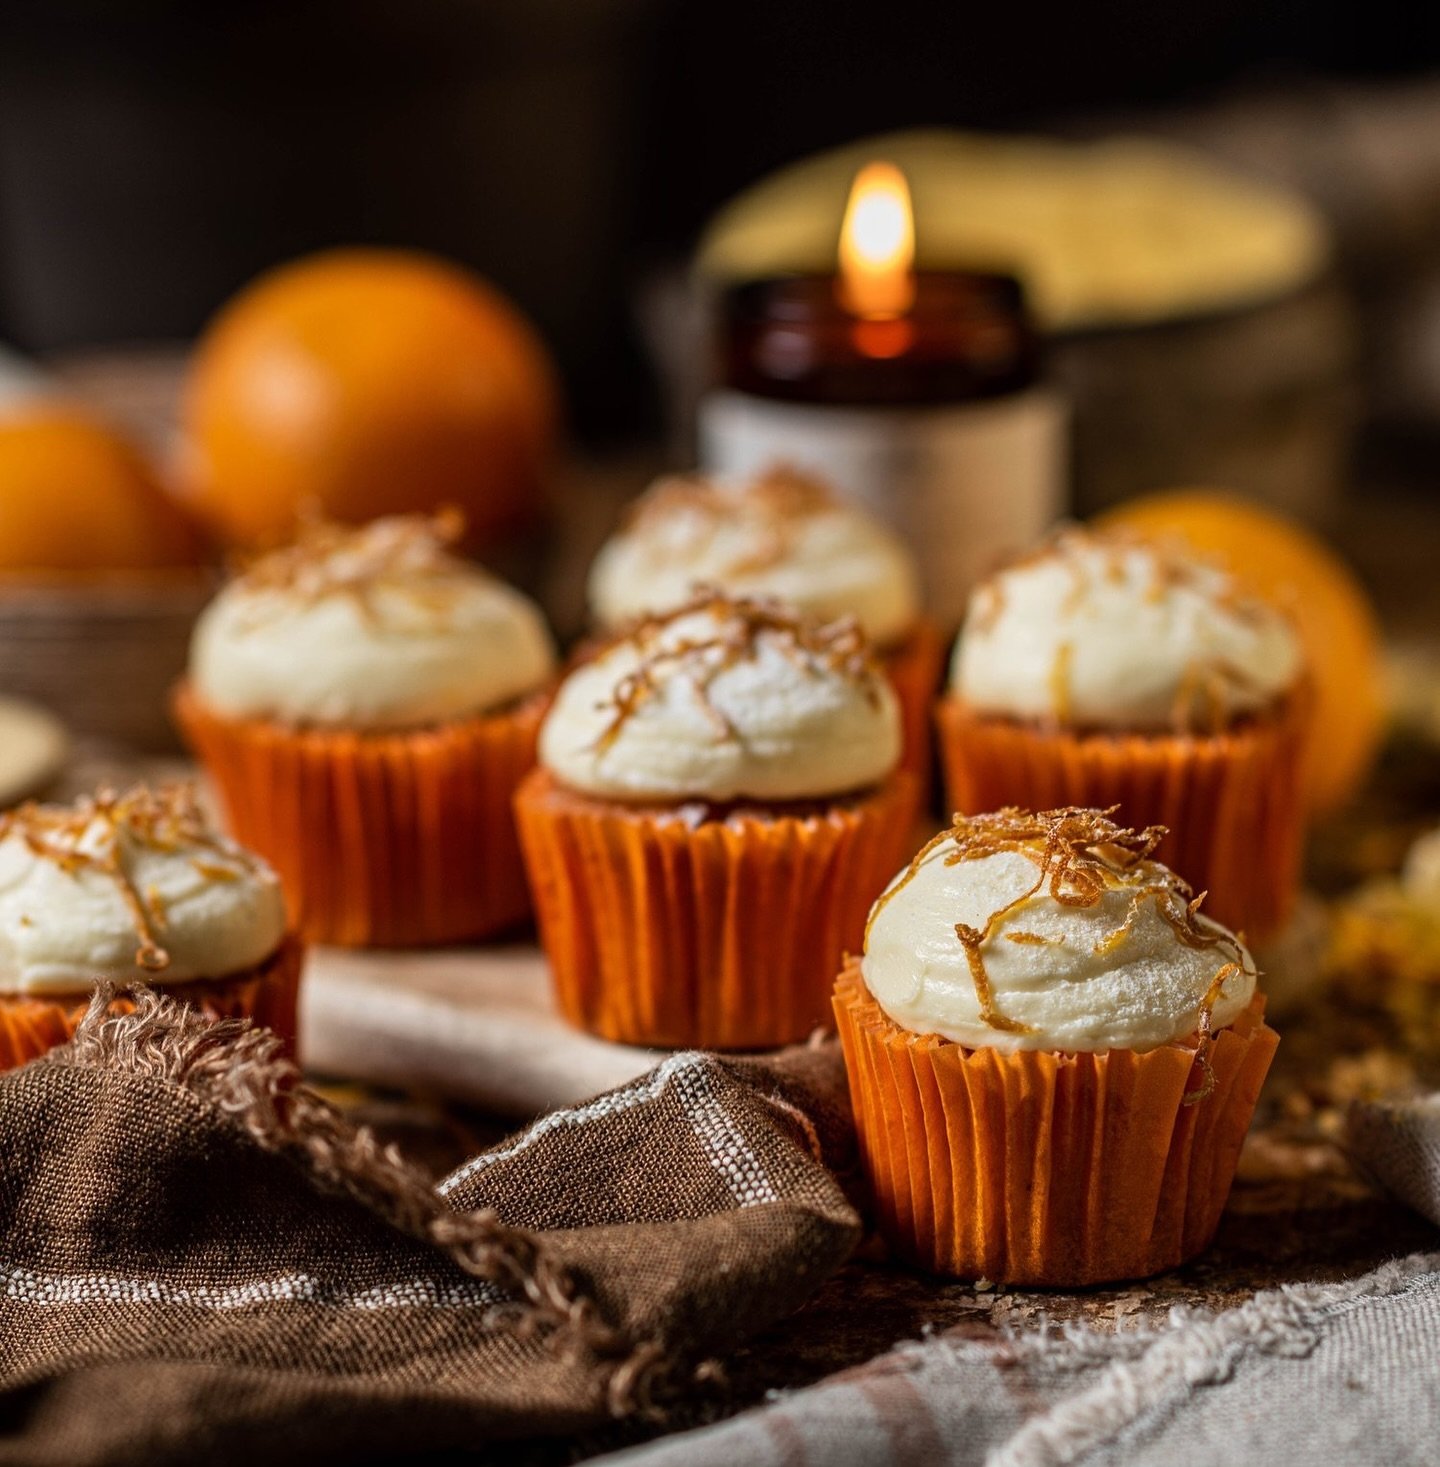 Looking for a cozy gluten free option? 

Our zesty Orange &amp; Polenta cupcakes will satisfy that sweet tooth without compromising on taste 🧁🍊

For more gluten free options, explore our website or download our app 🙌

#glutenfreeindulgence #zestfu